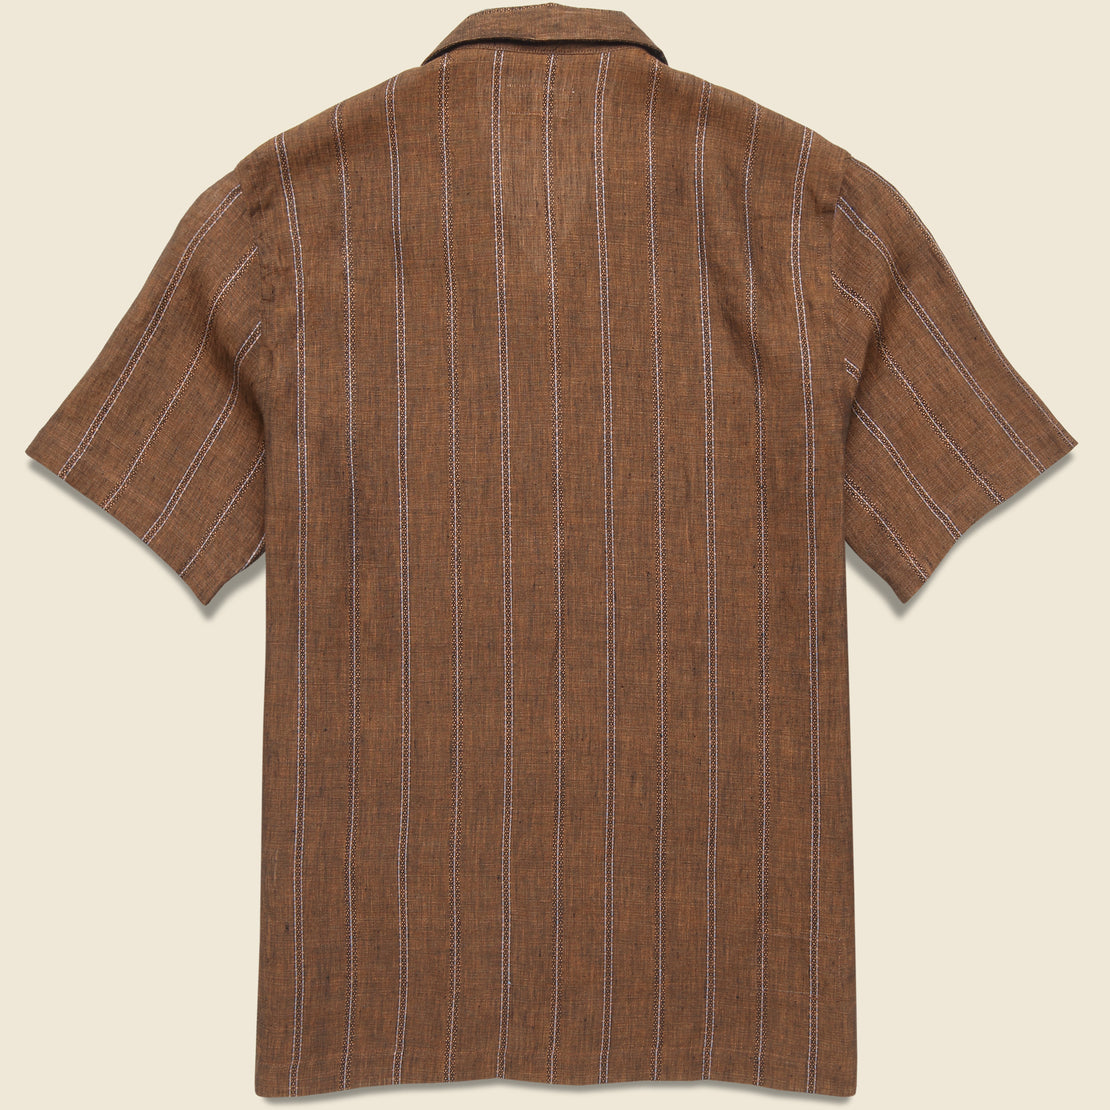 Stripe Linen Road Shirt - Brown - Universal Works - STAG Provisions - Tops - S/S Woven - Stripe